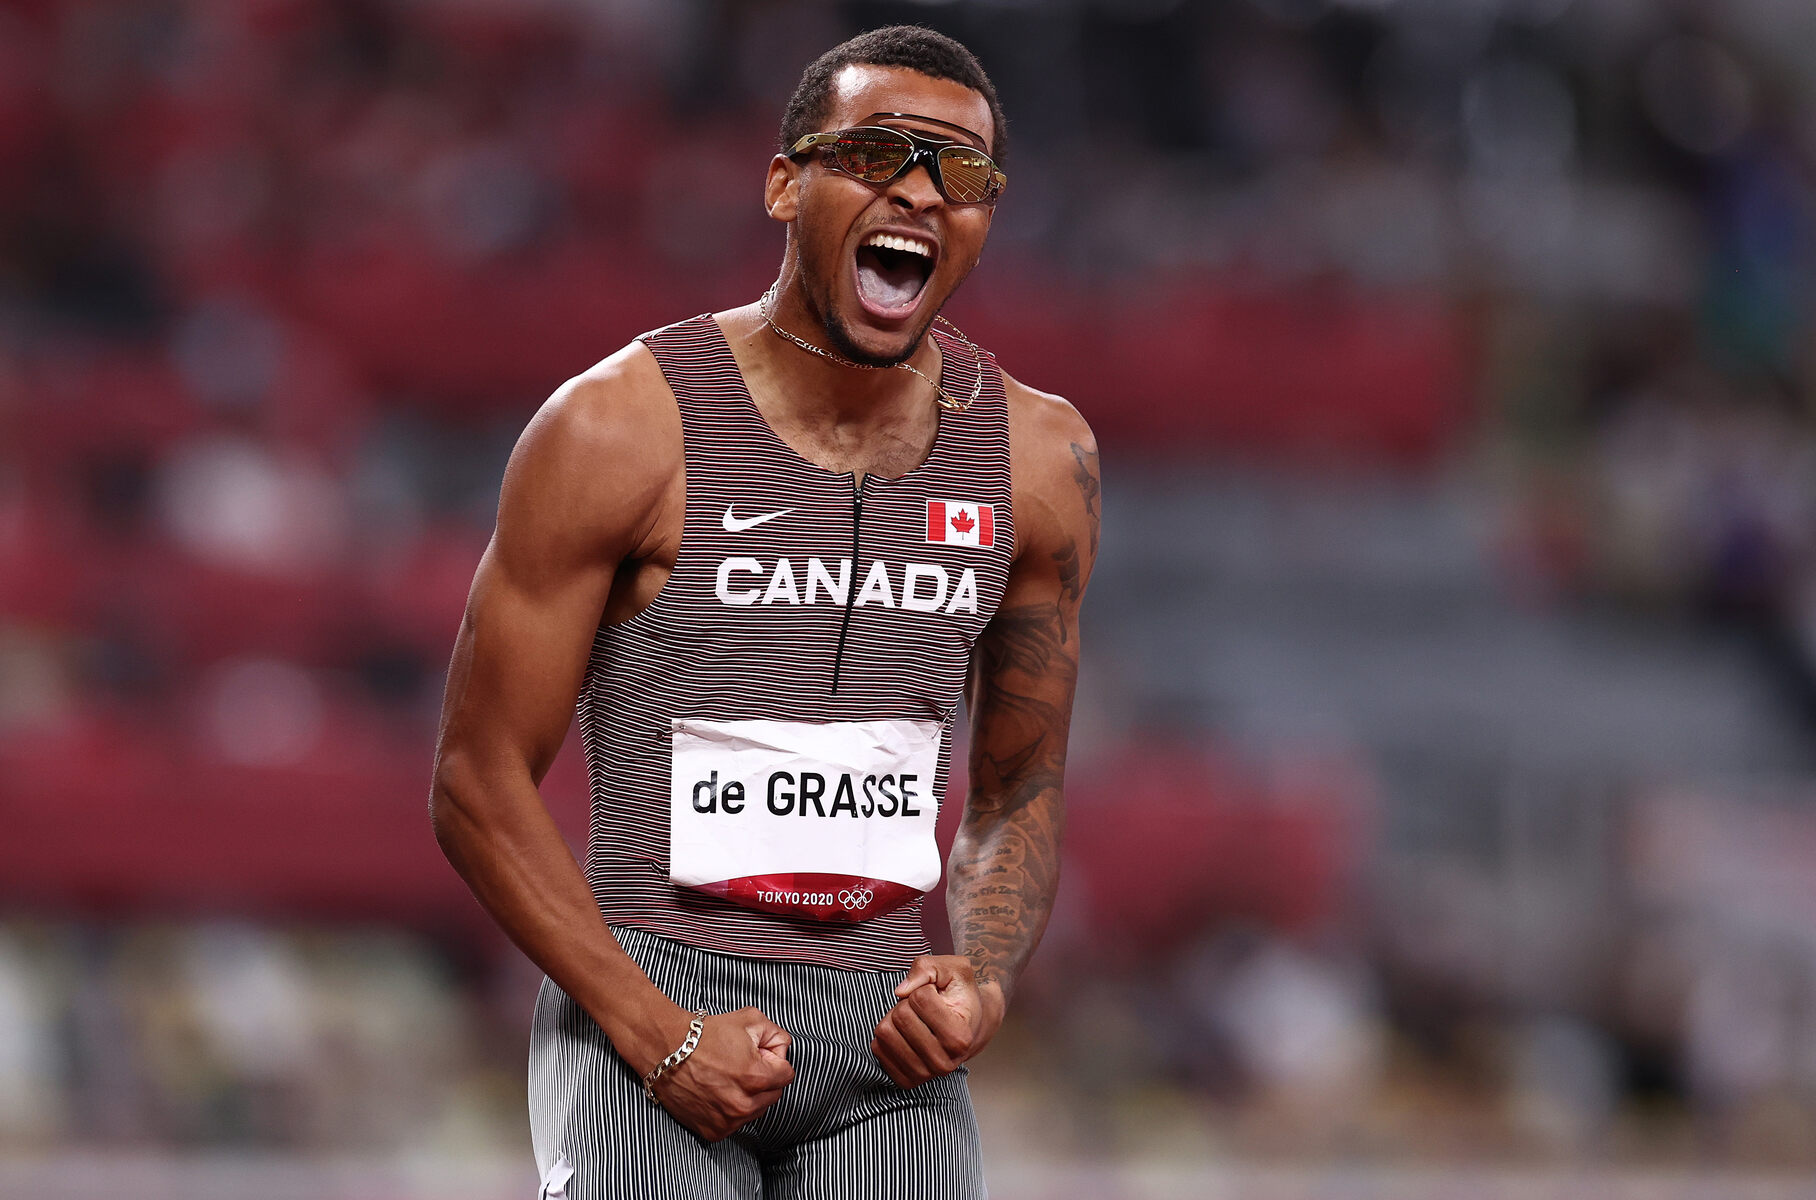 24-mind-blowing-facts-about-andre-de-grasse